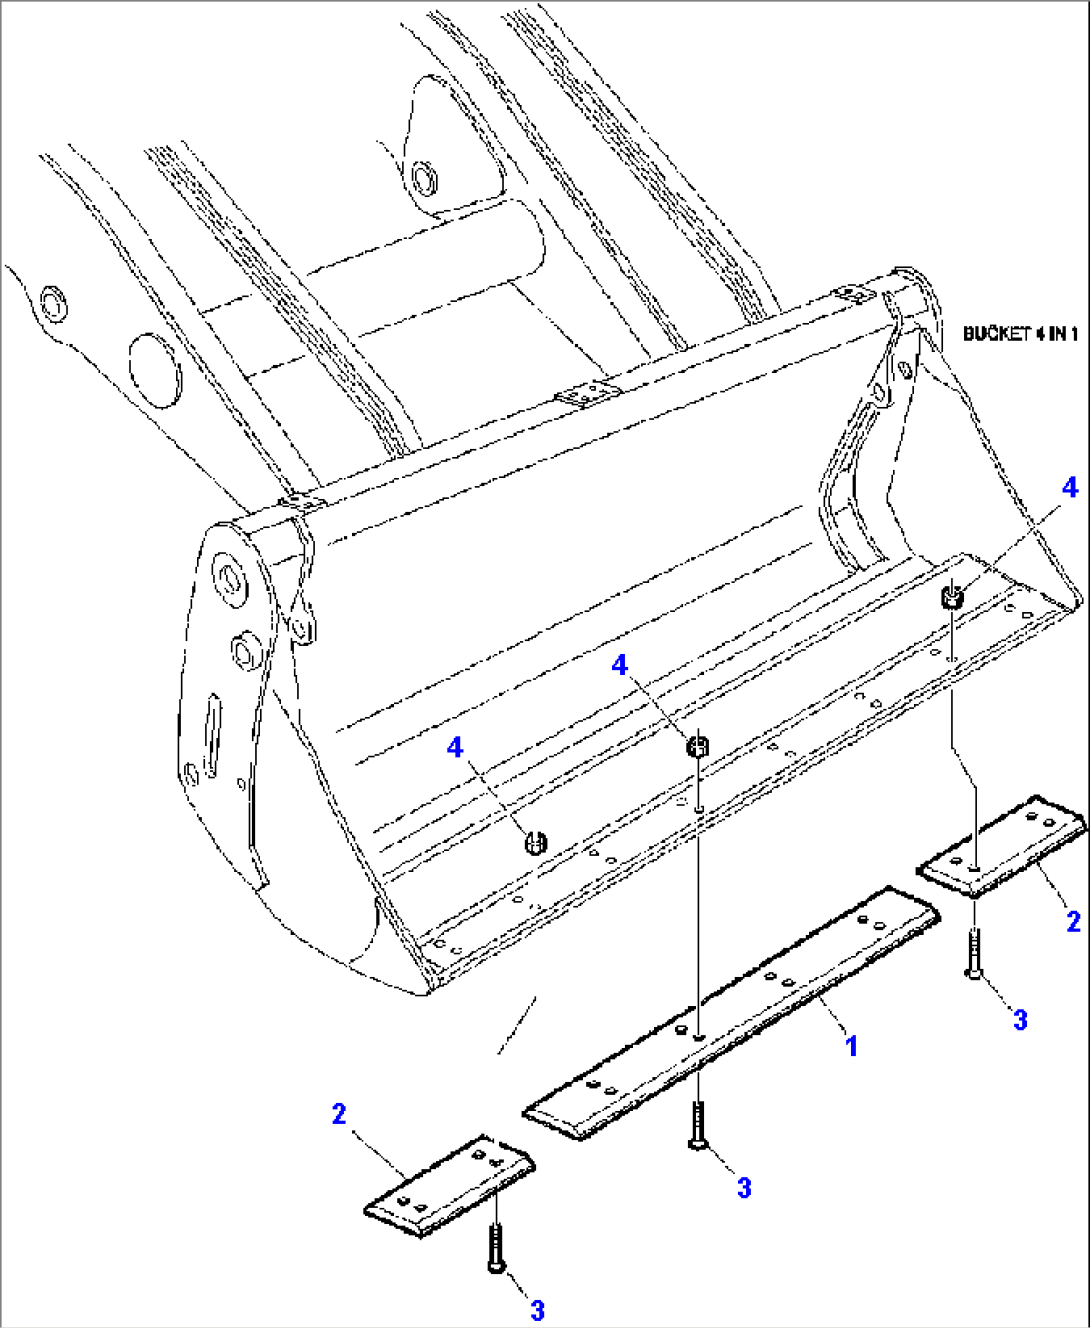 FIG. T7215-01A0 BLADE FOR BUCKET - 4 IN 1